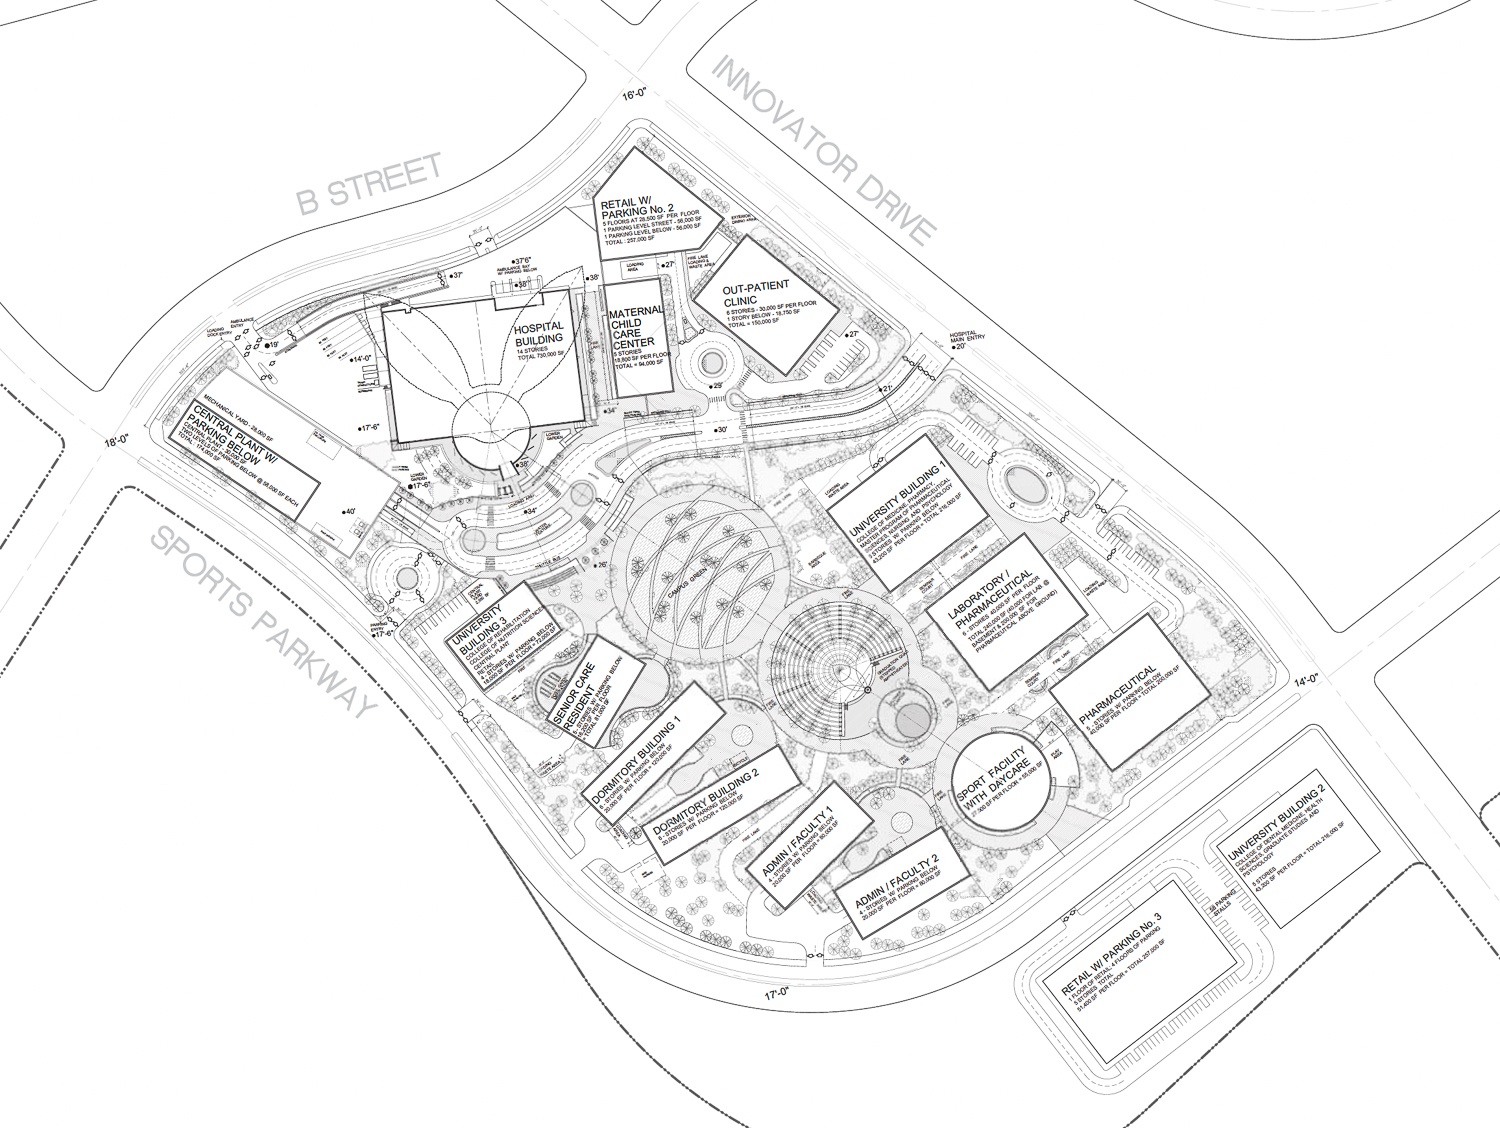 California Northstate University Medical Center landscaping site map, rendering by Fong & Chan Architects